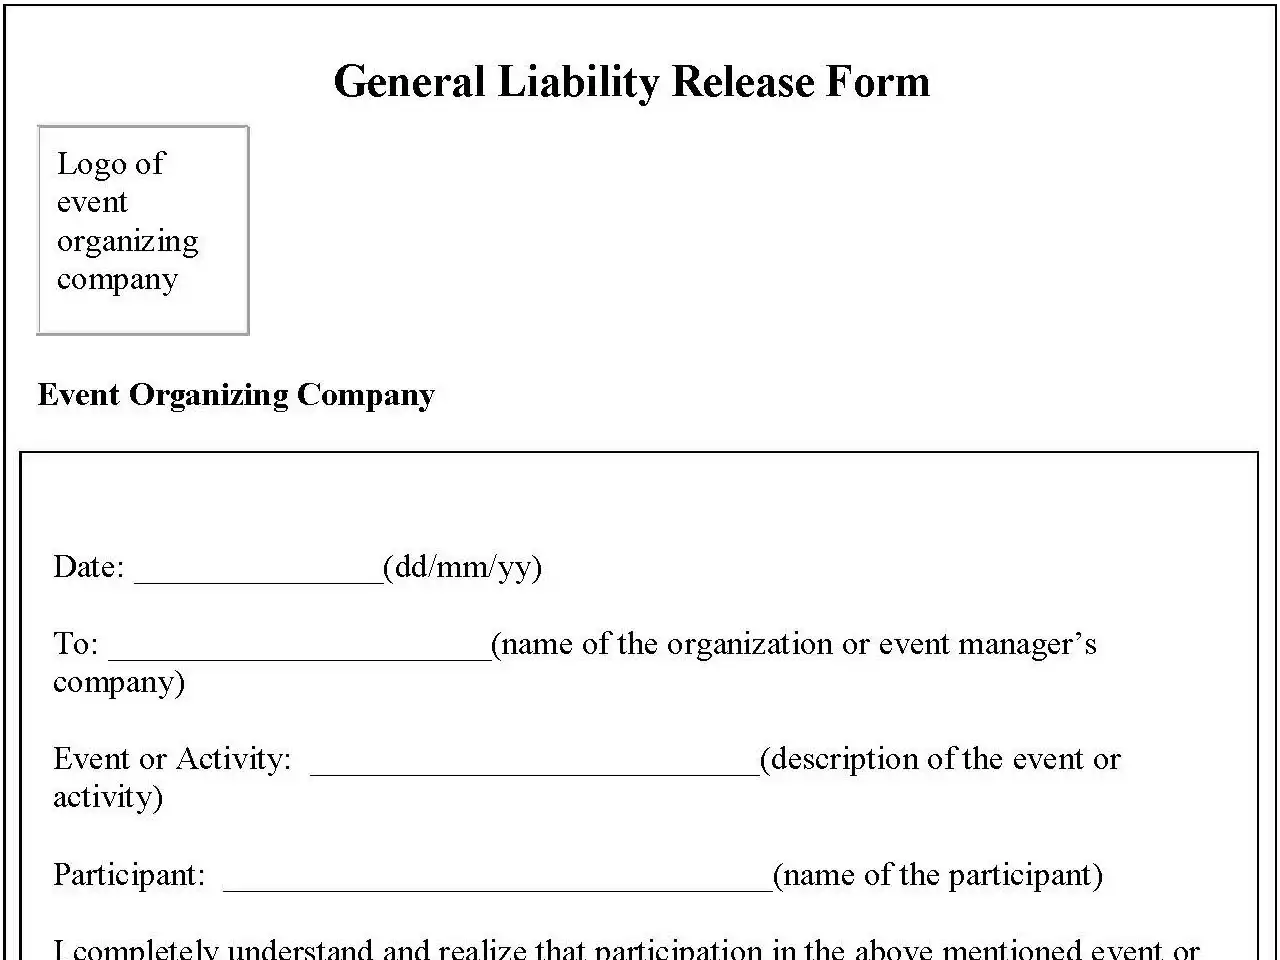 General Liability Release Form